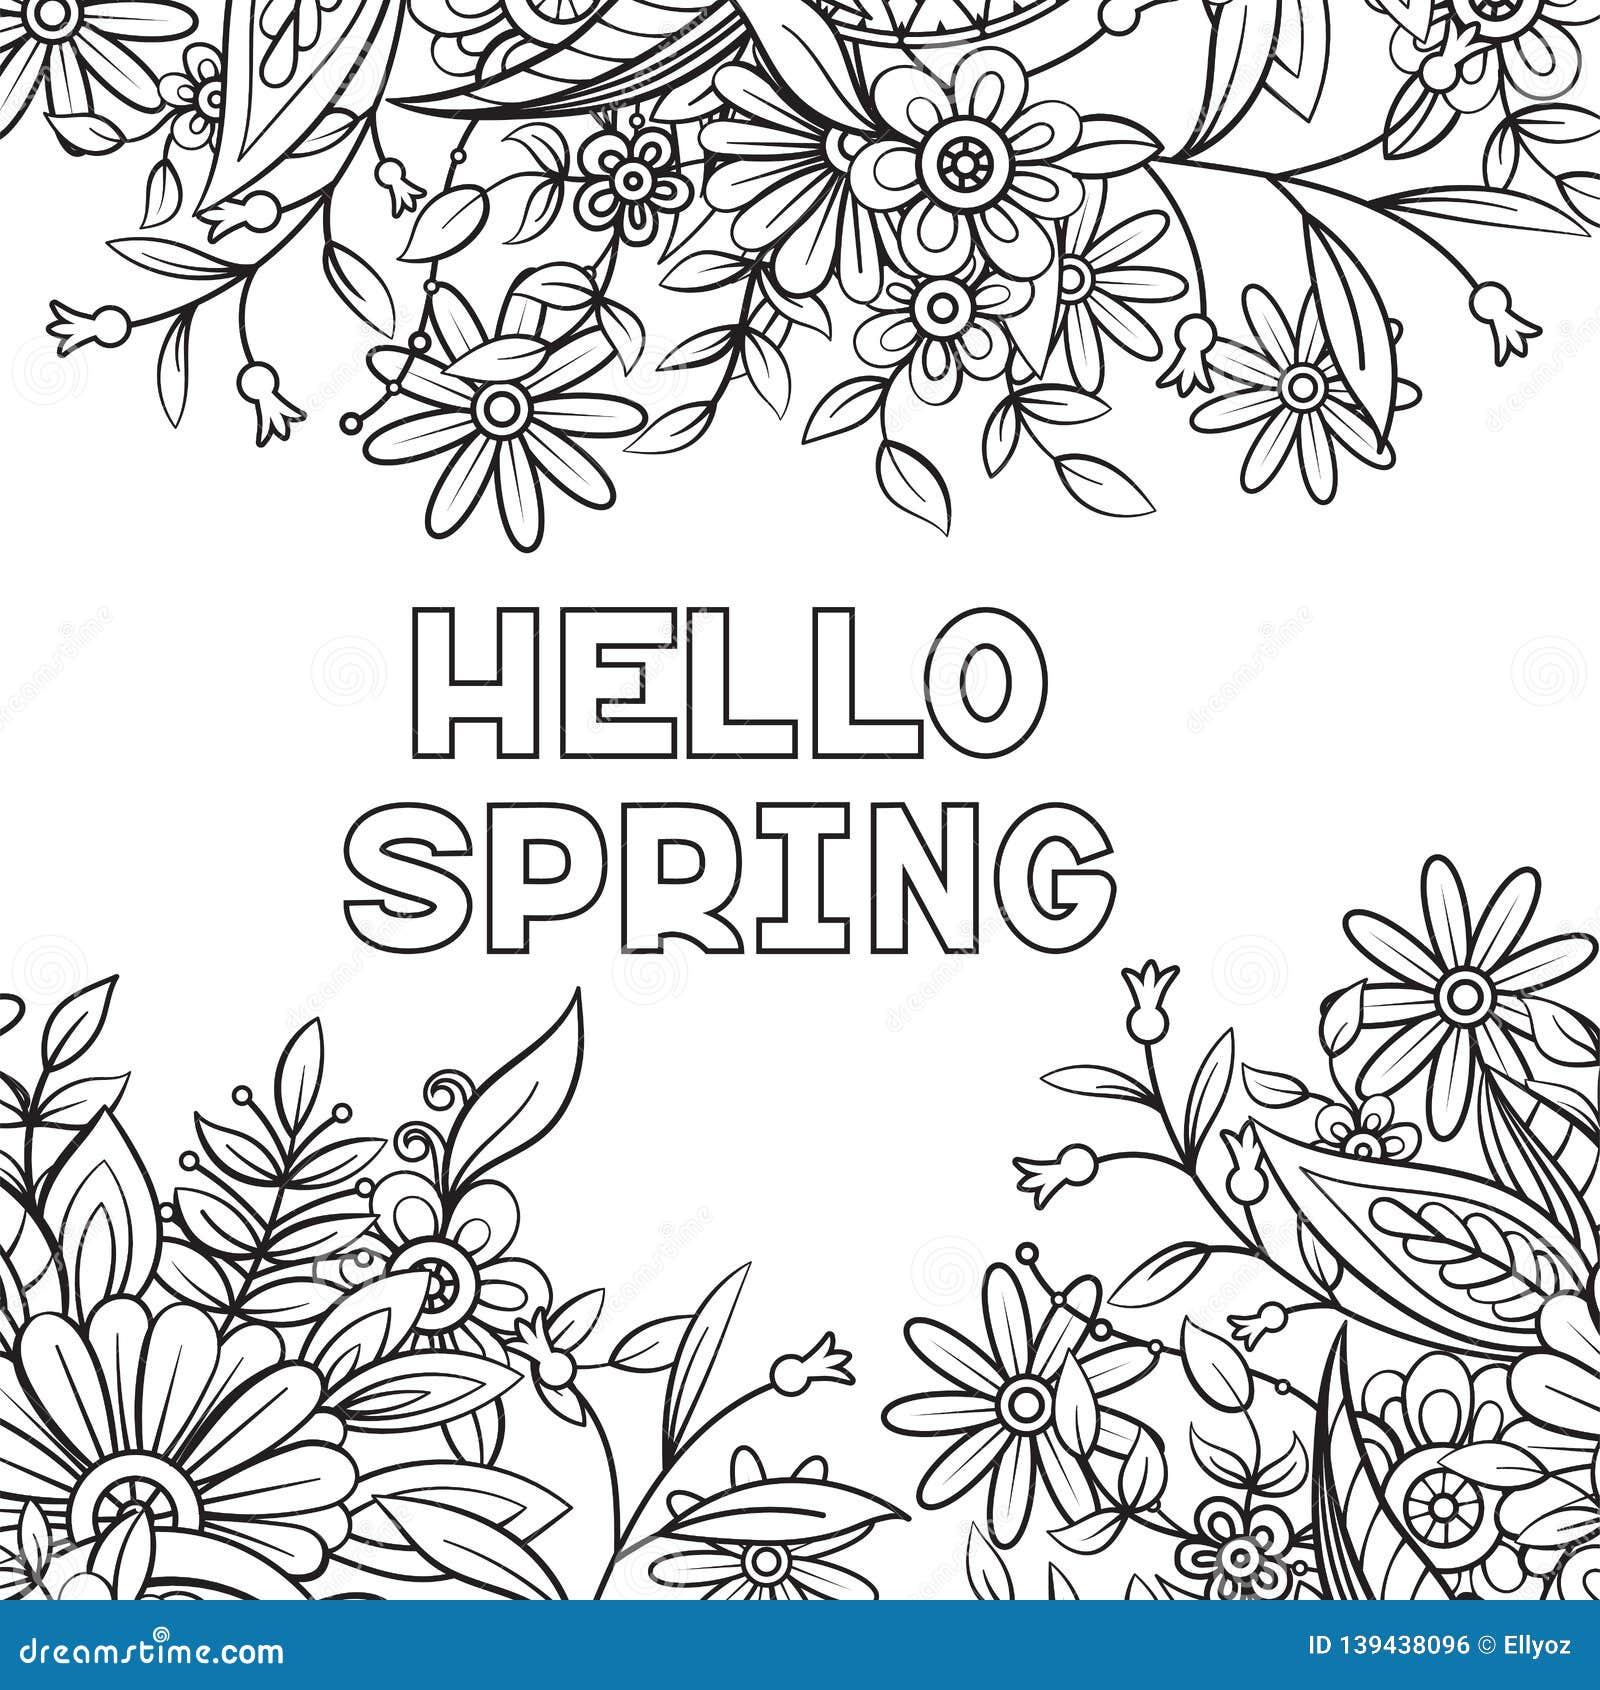 Hello spring coloring page stock vector. Illustration of card ...